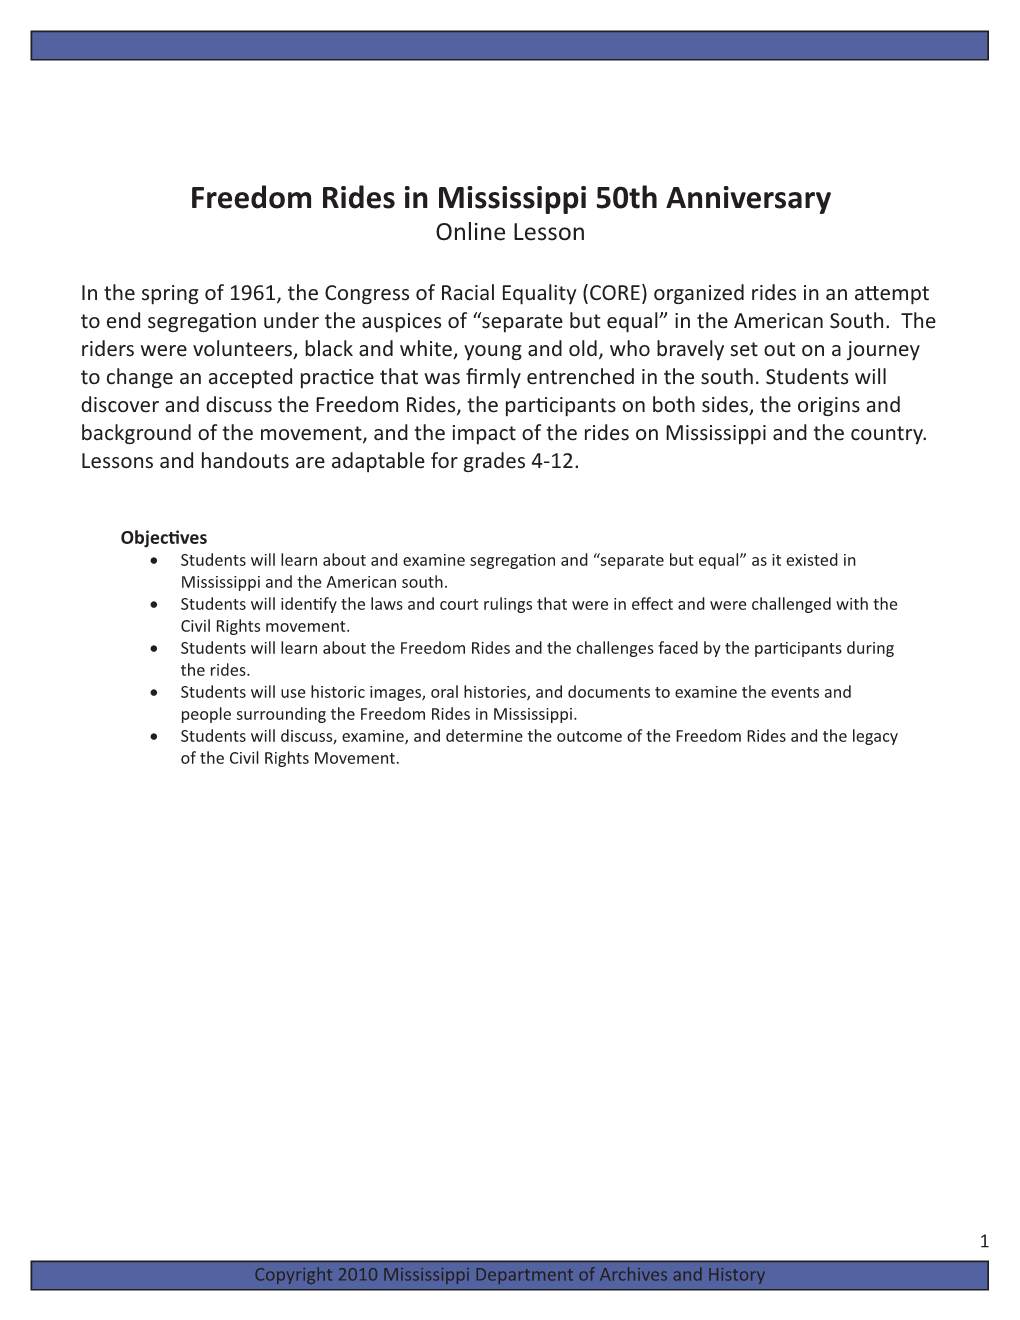 Freedom Rides in Mississippi 50Th Anniversary Online Lesson